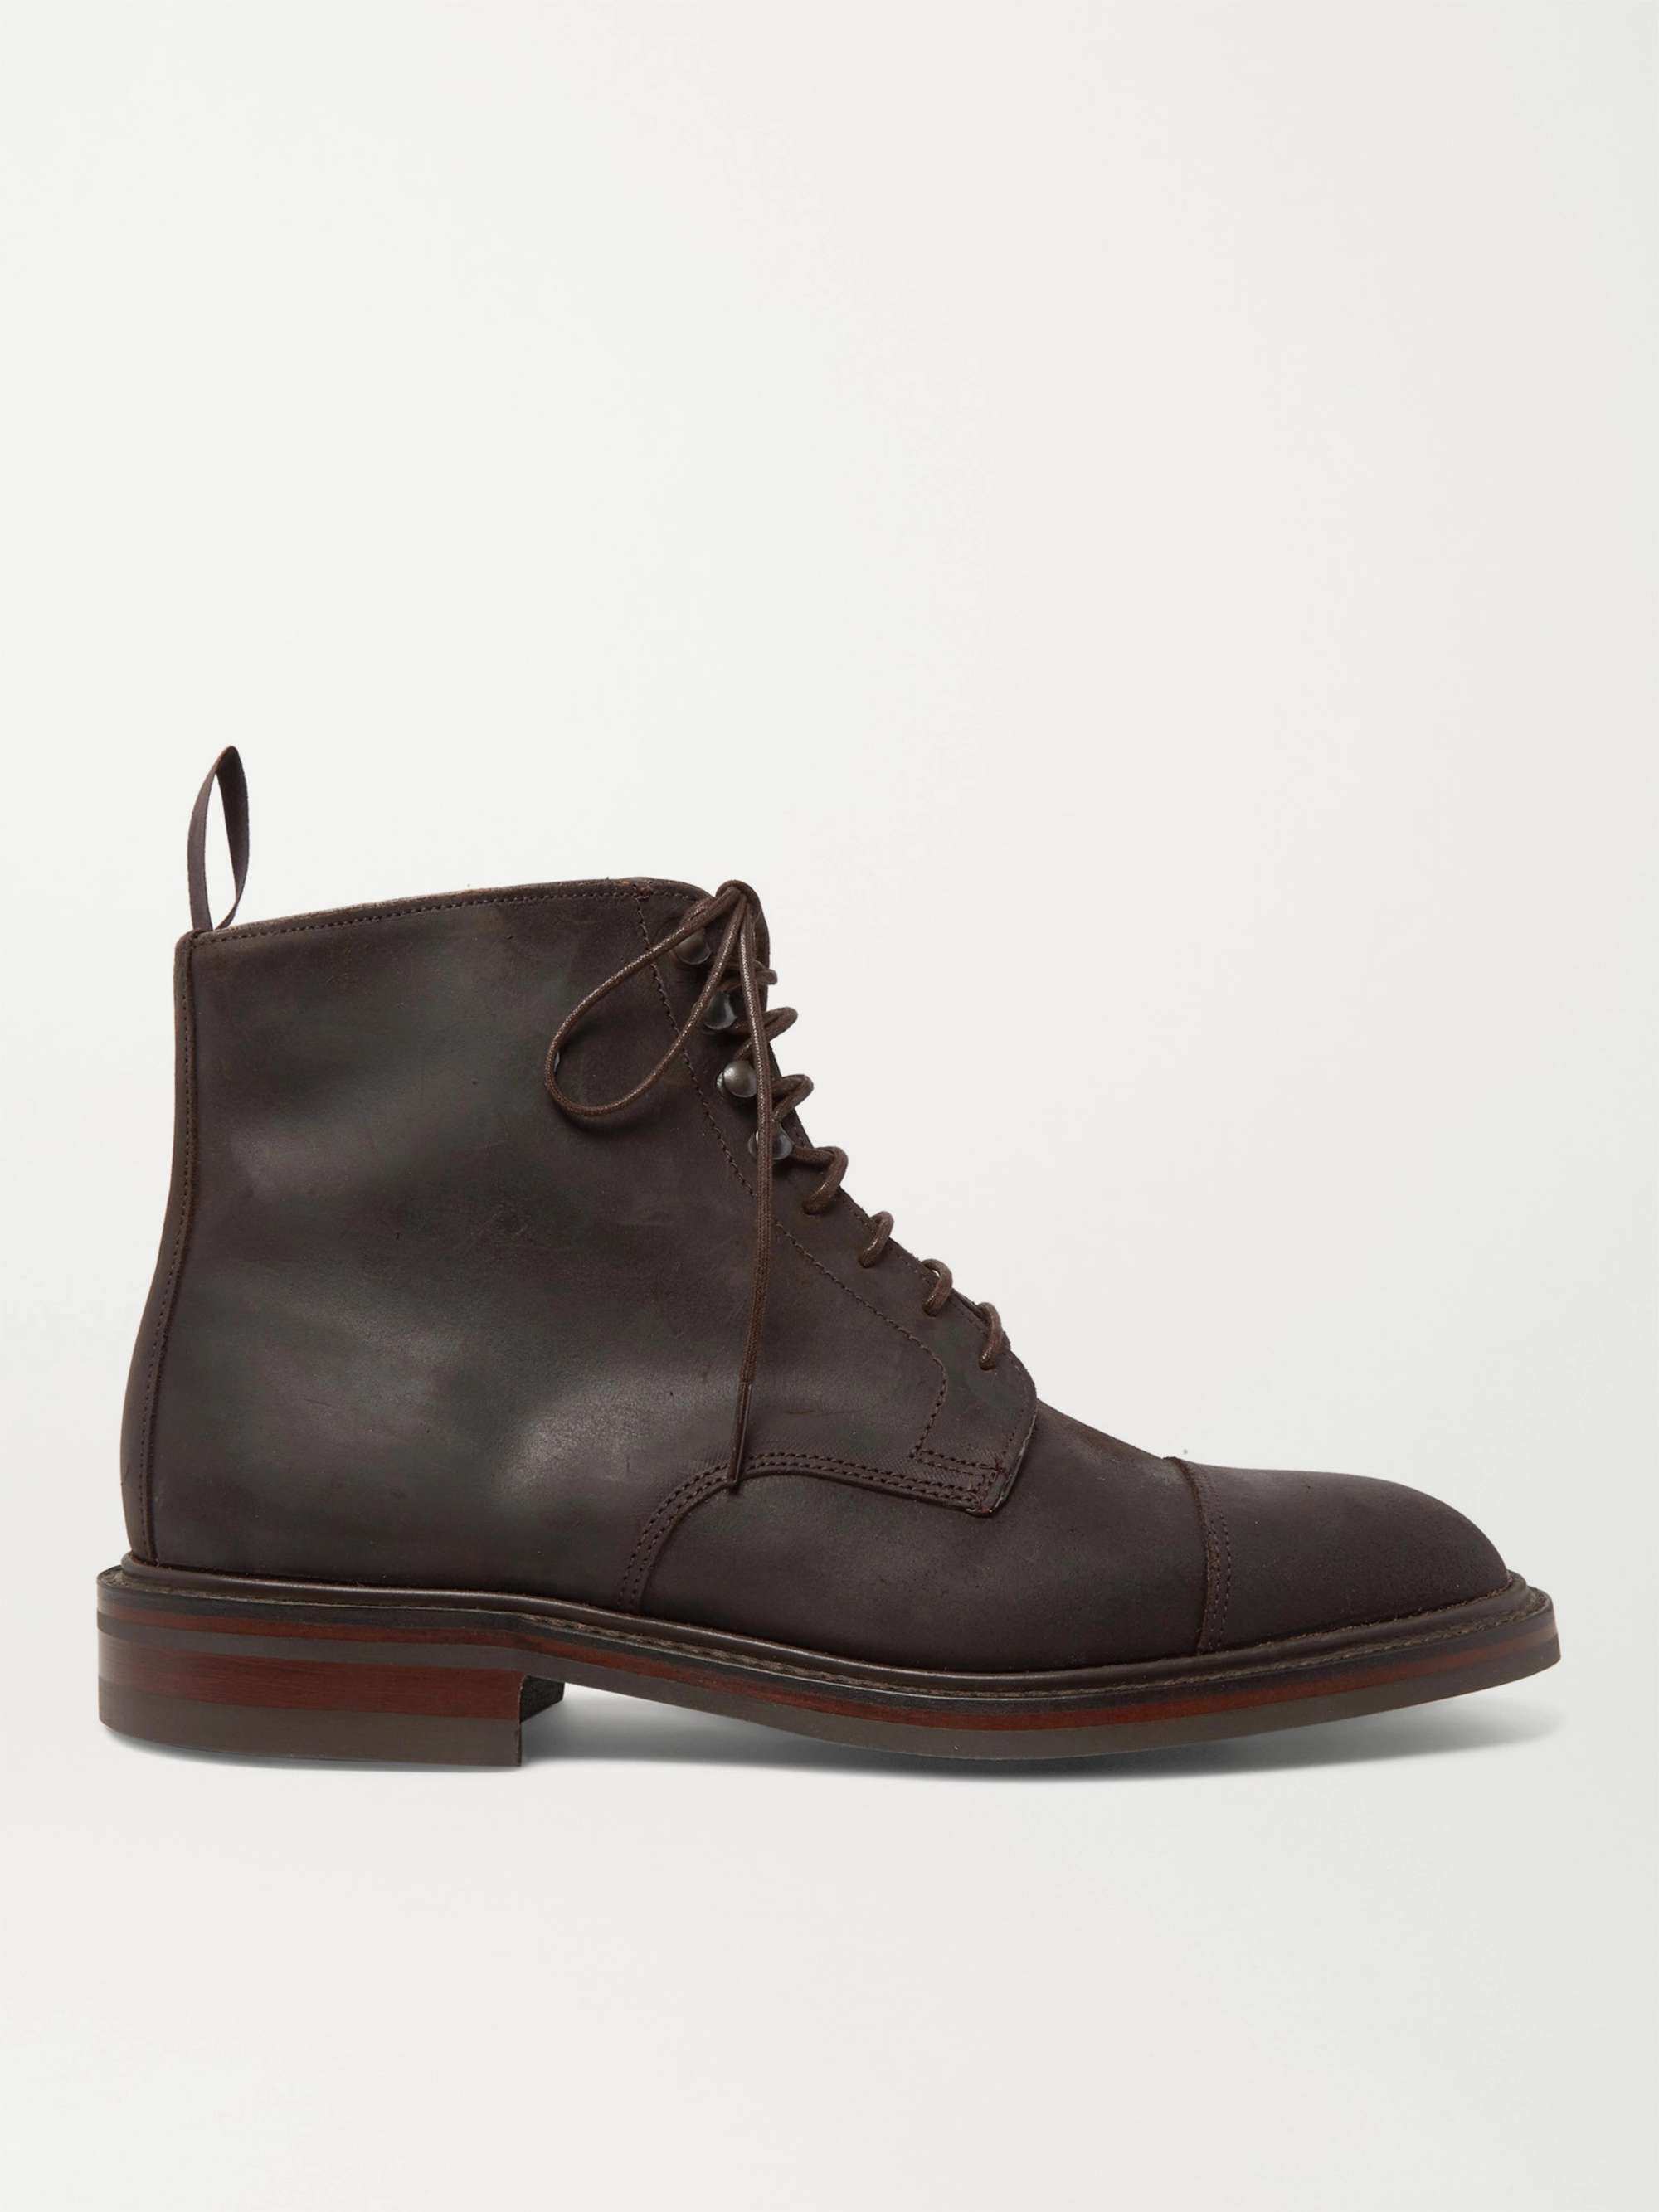 KINGSMAN + George Cleverley Taron Cap-Toe Roughout Leather Boots